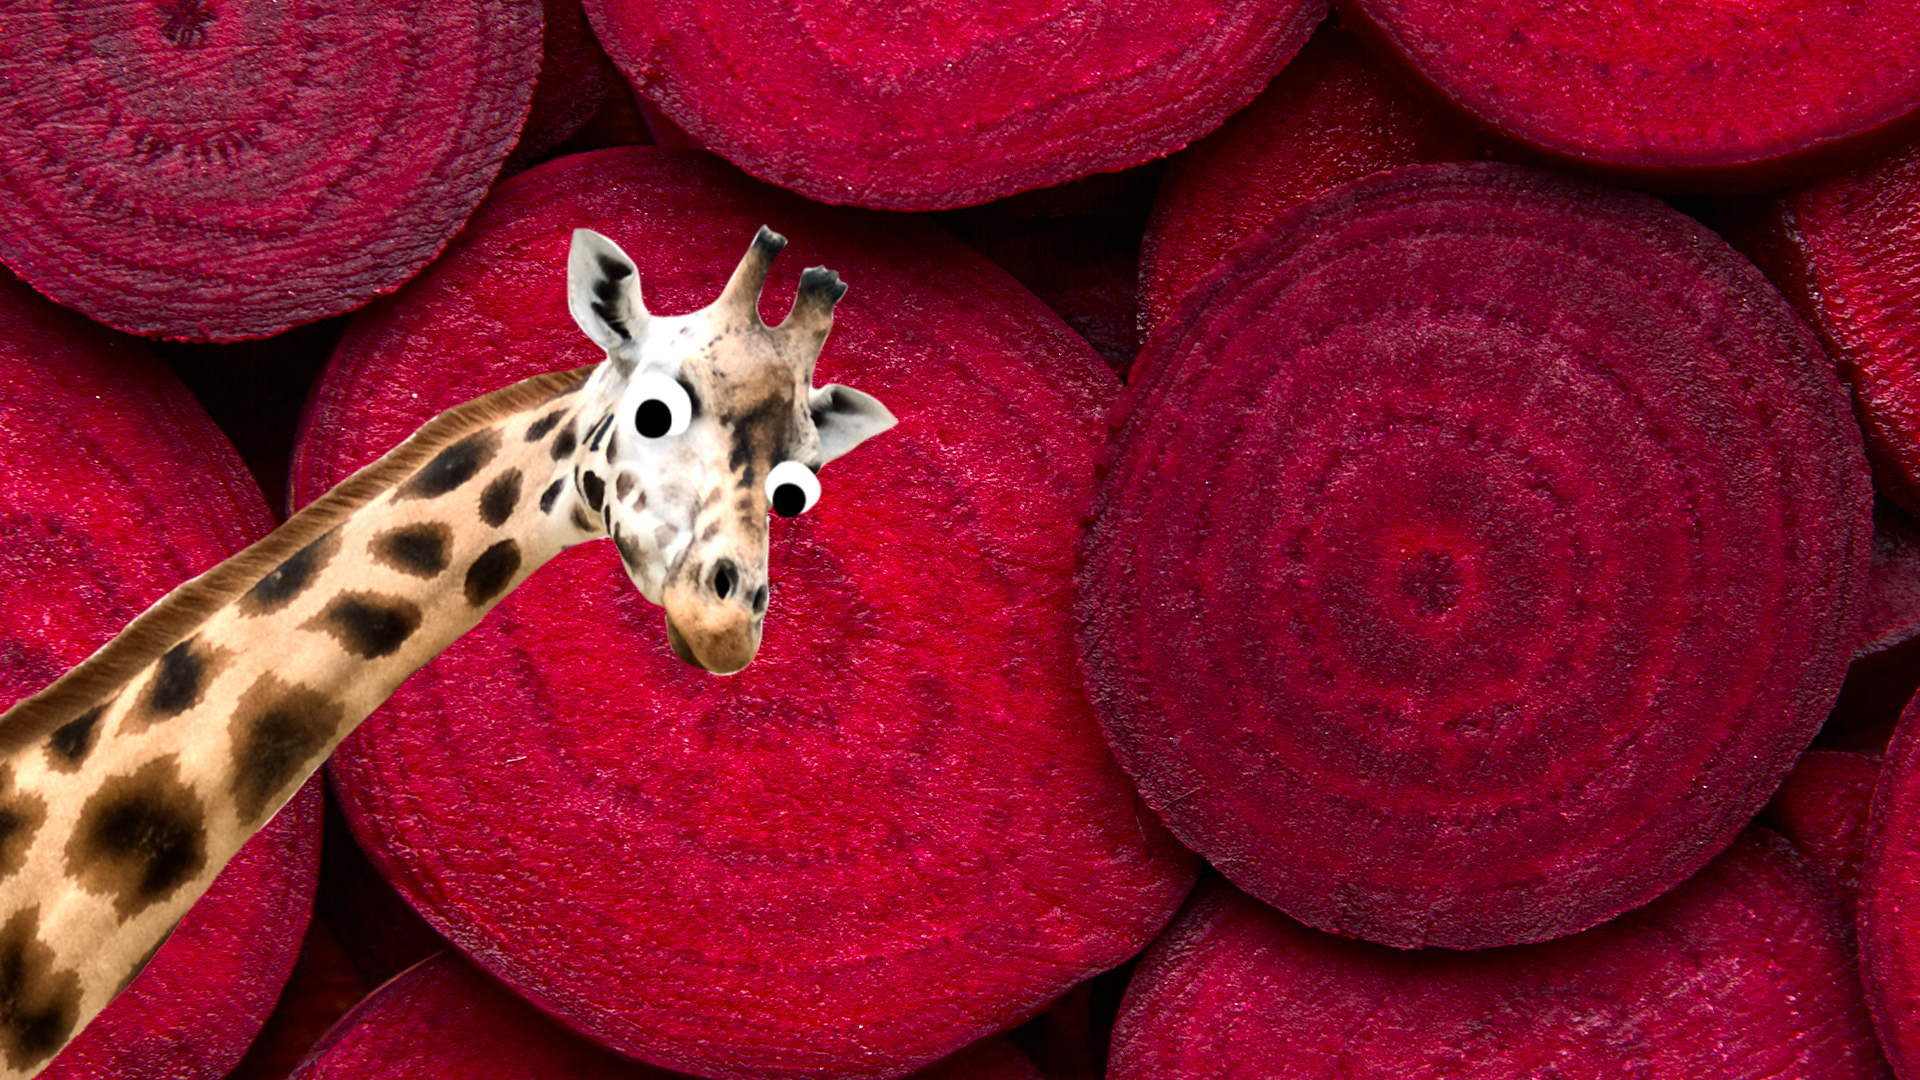 Some beetroot and a derpy giraffe